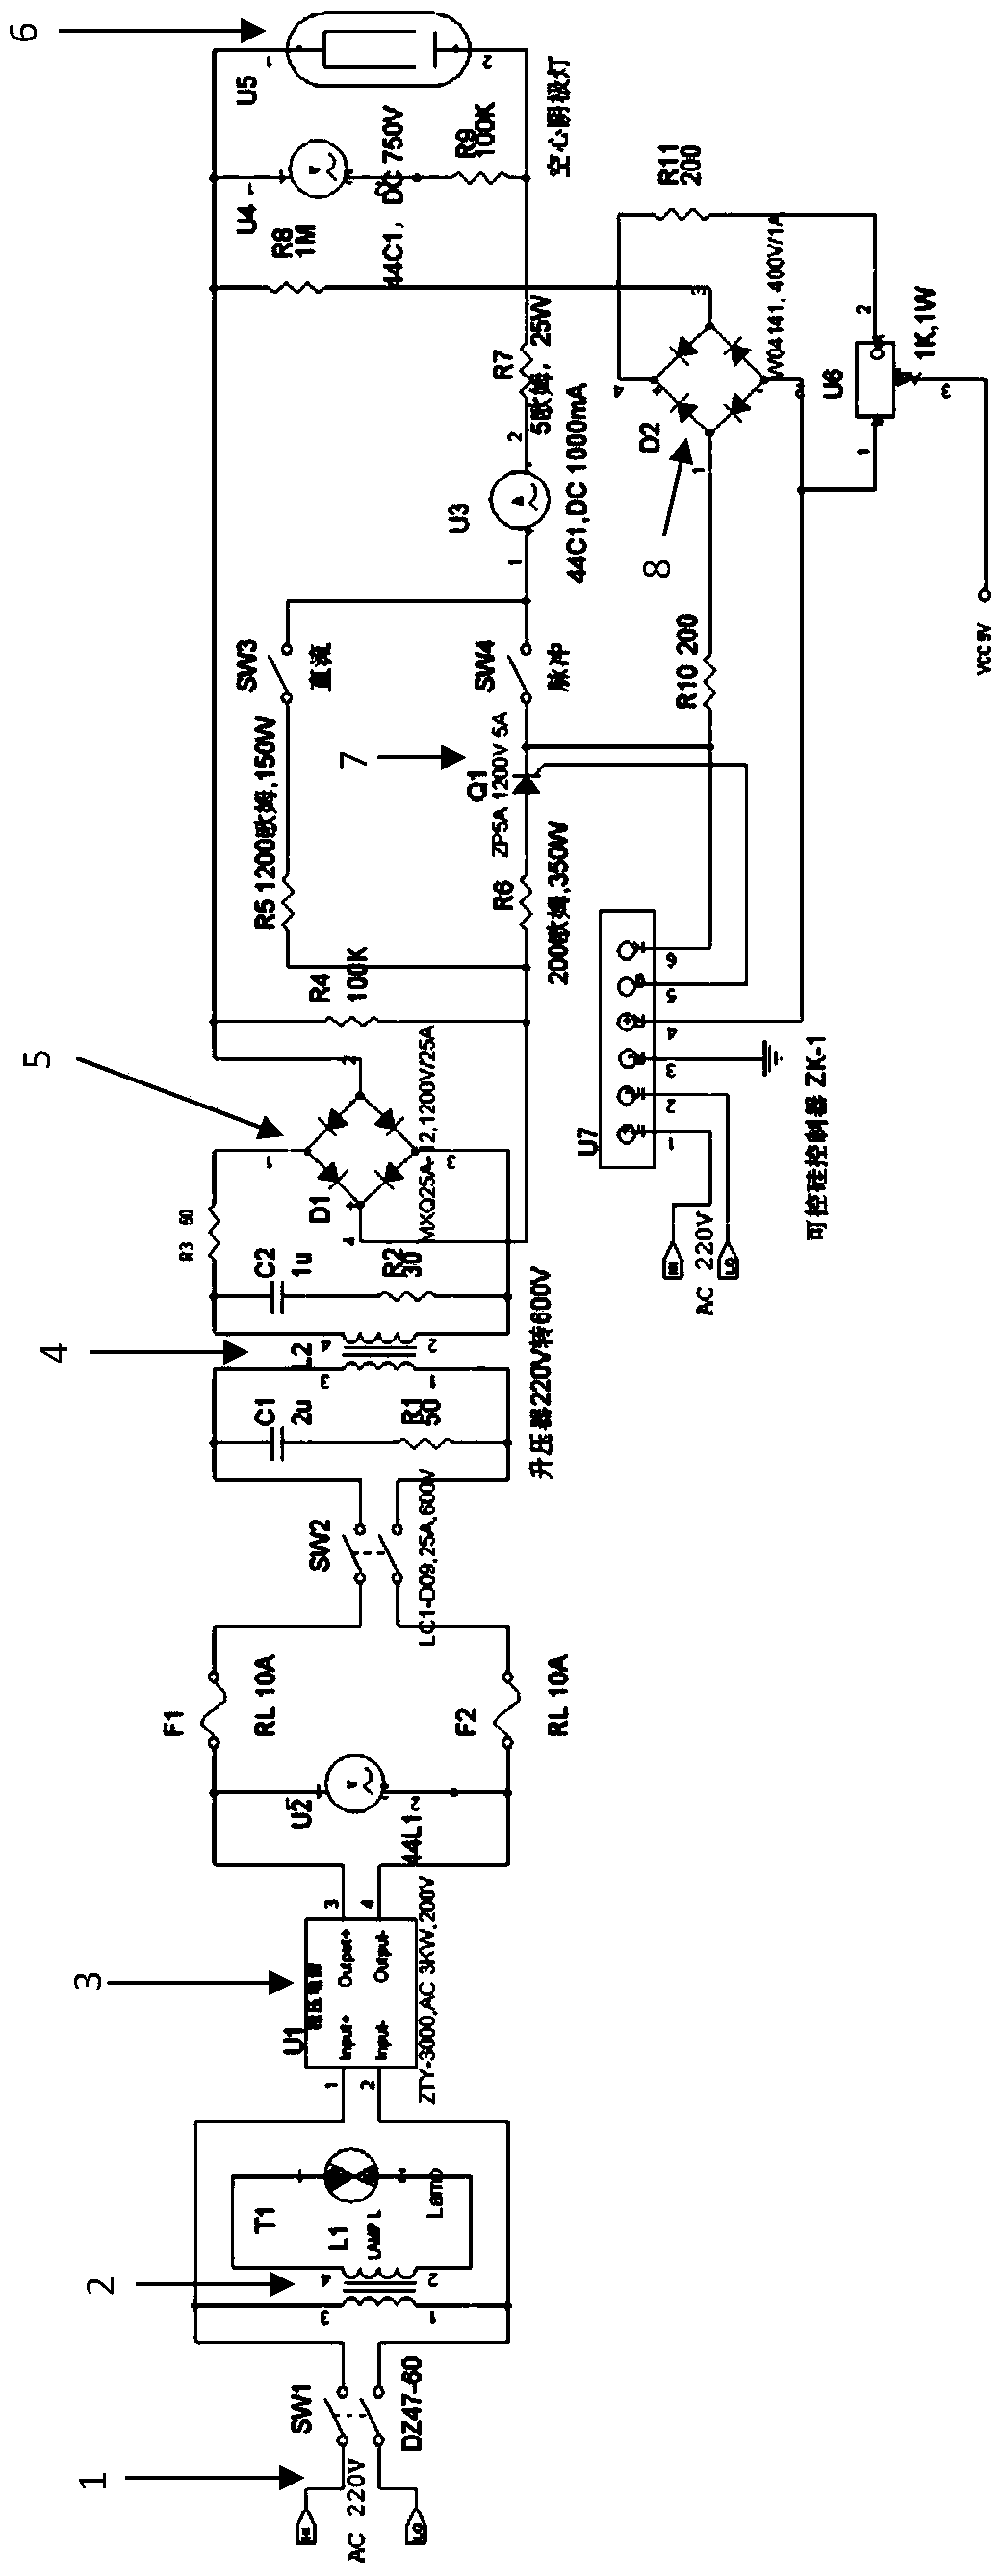 Power supply device used for hollow cathode detection system